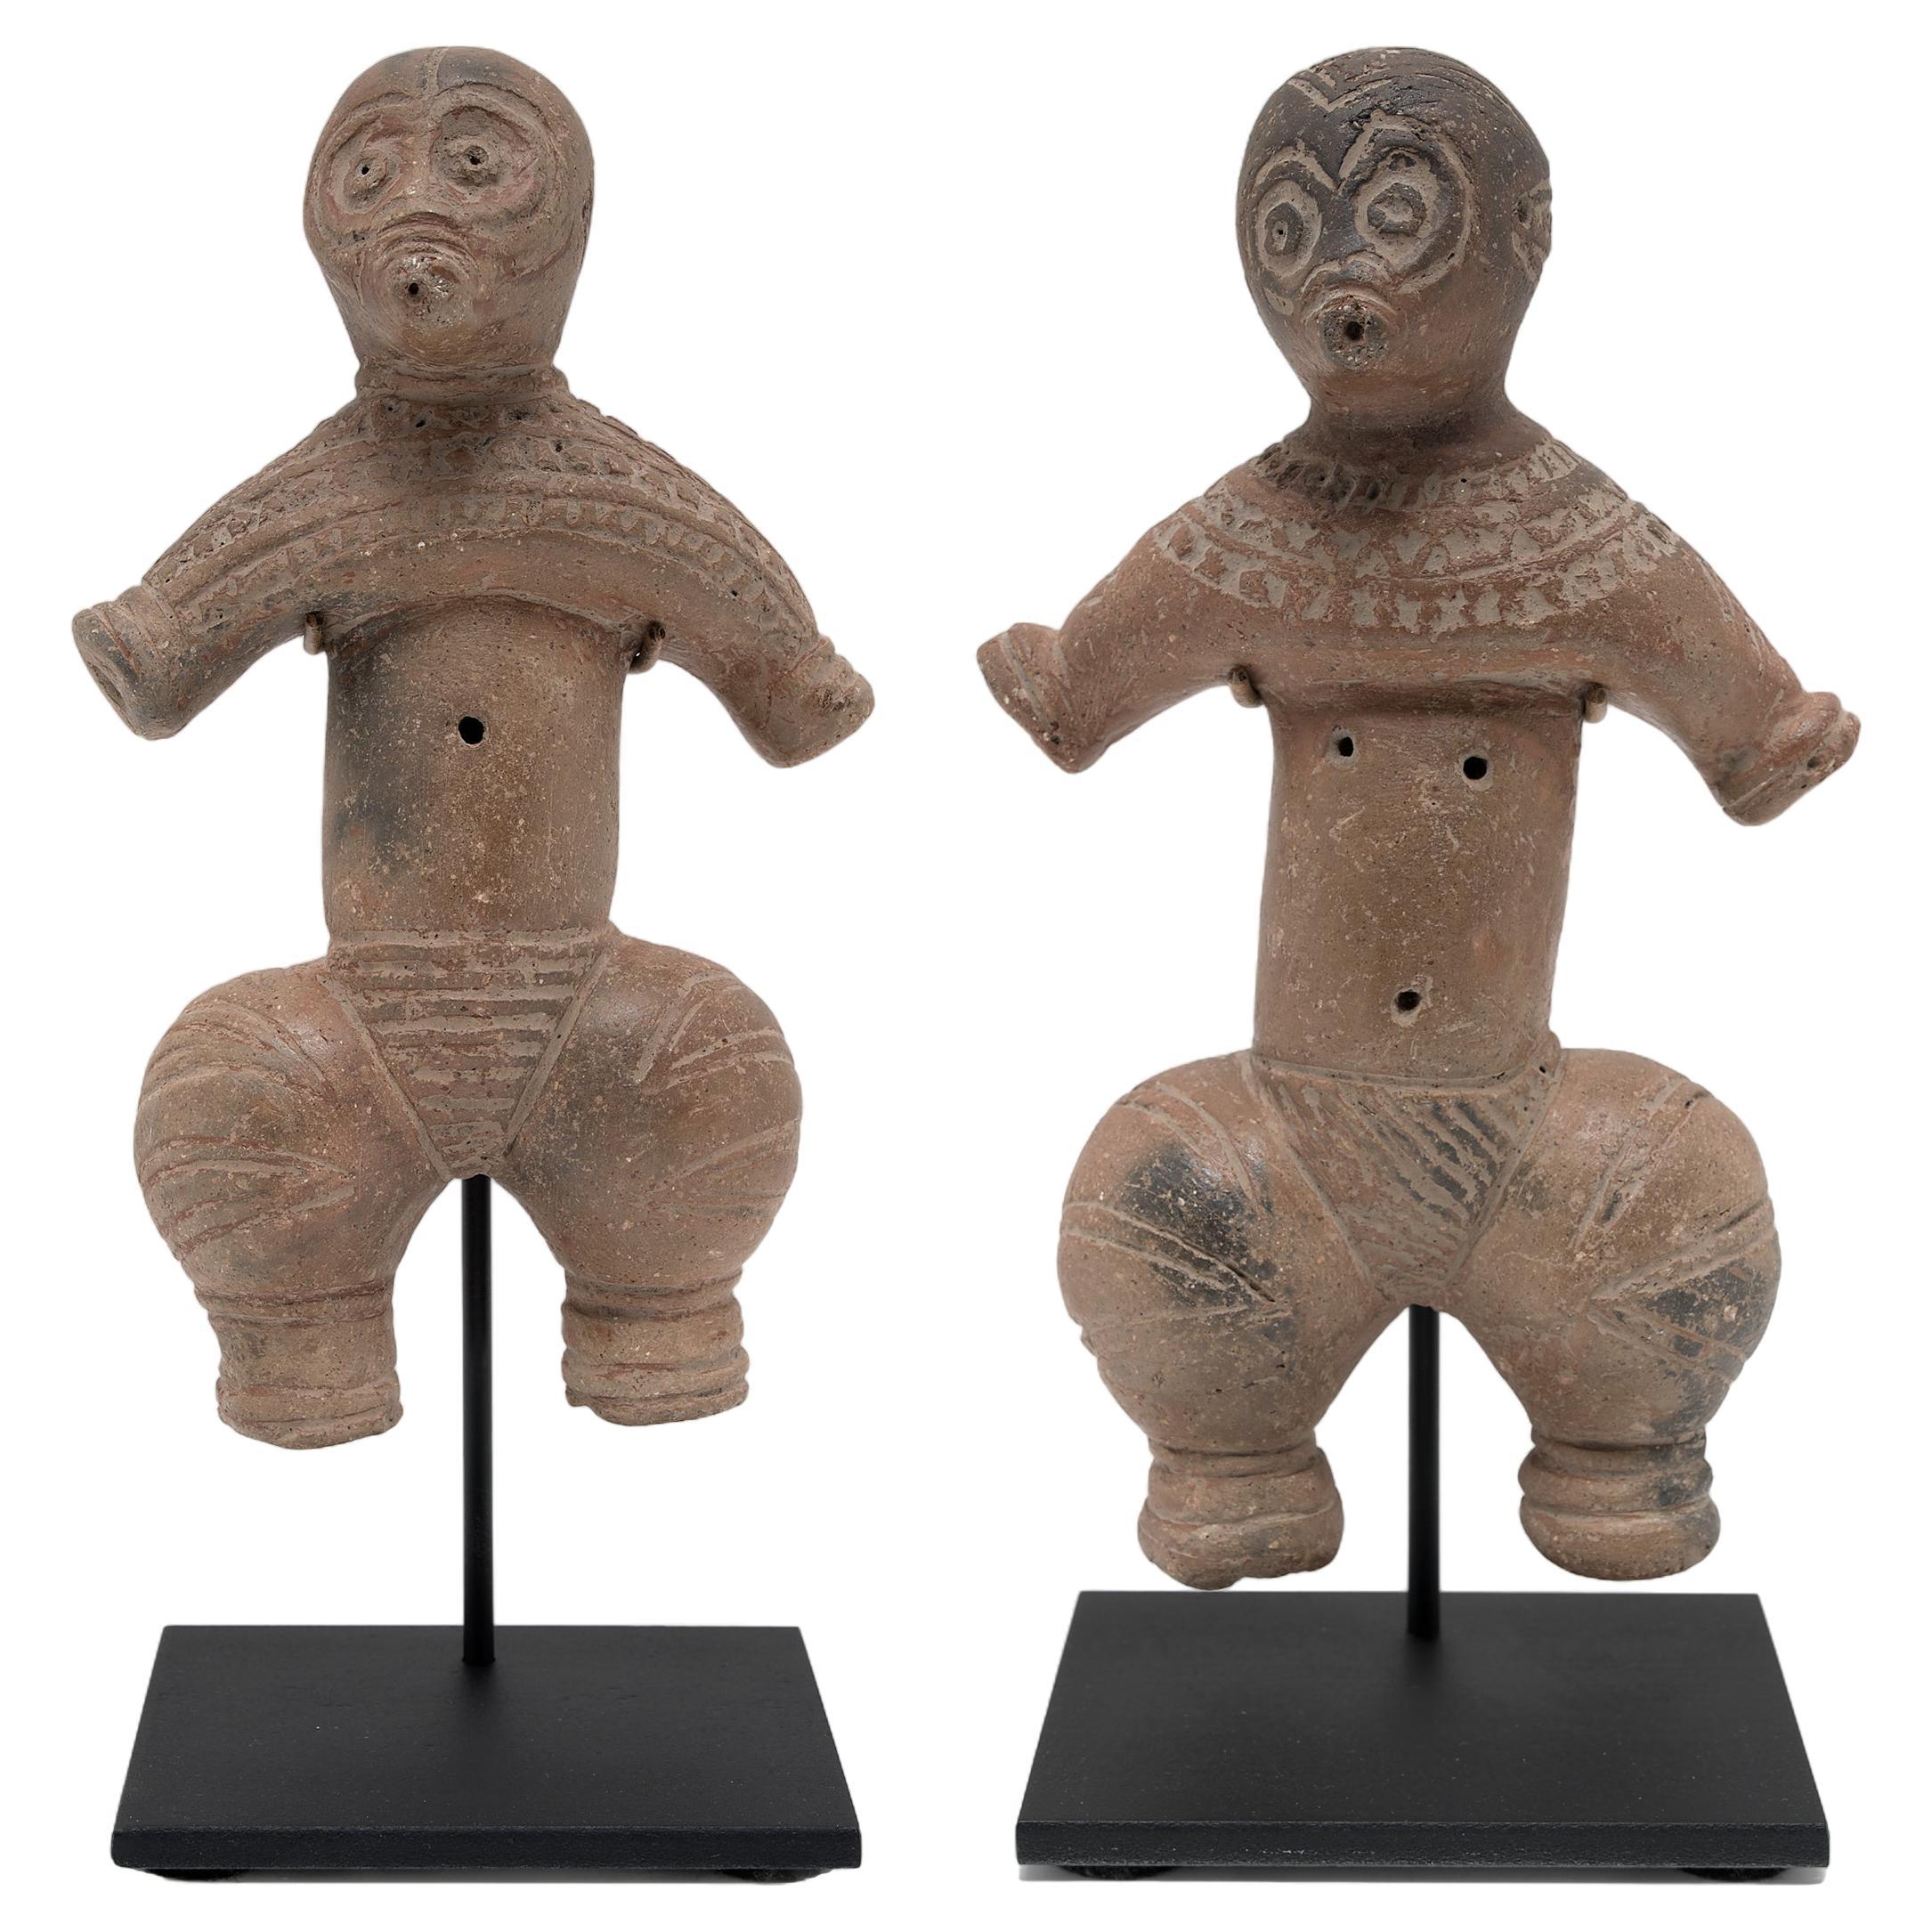 Pair of Etched Dogu-Style Terracotta Figures